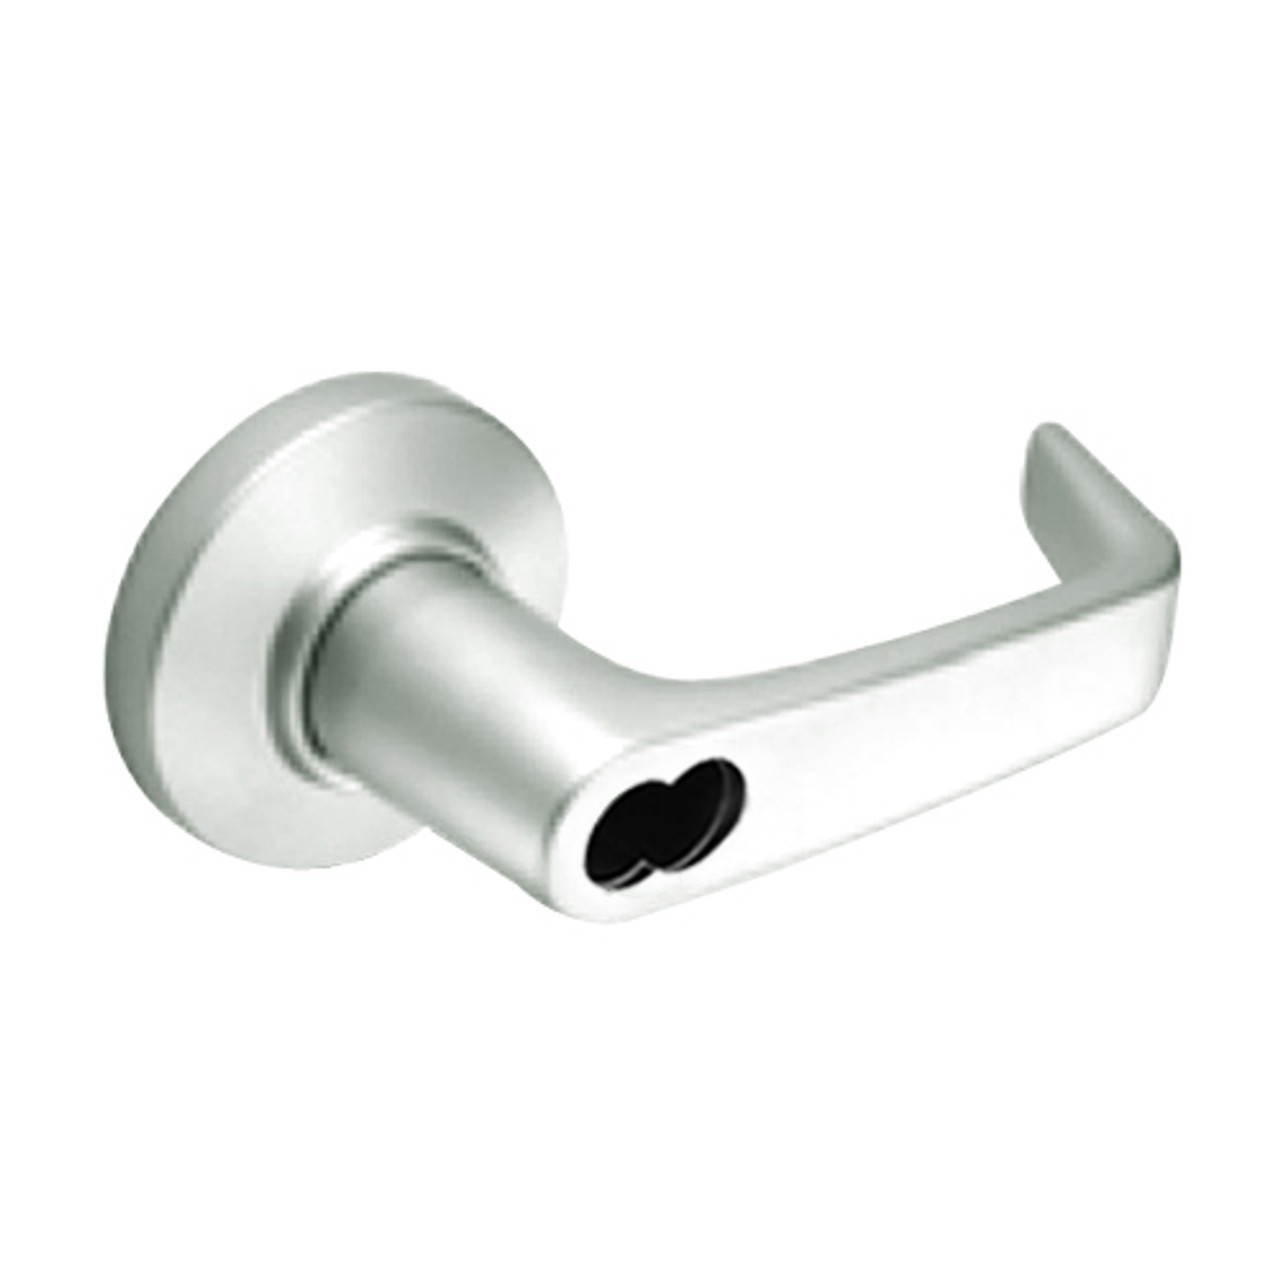 9K37A15CSTK618 Best 9K Series Dormitory or Storeroom Cylindrical Lever Locks with Contour Angle with Return Lever Design Accept 7 Pin Best Core in Bright Nickel